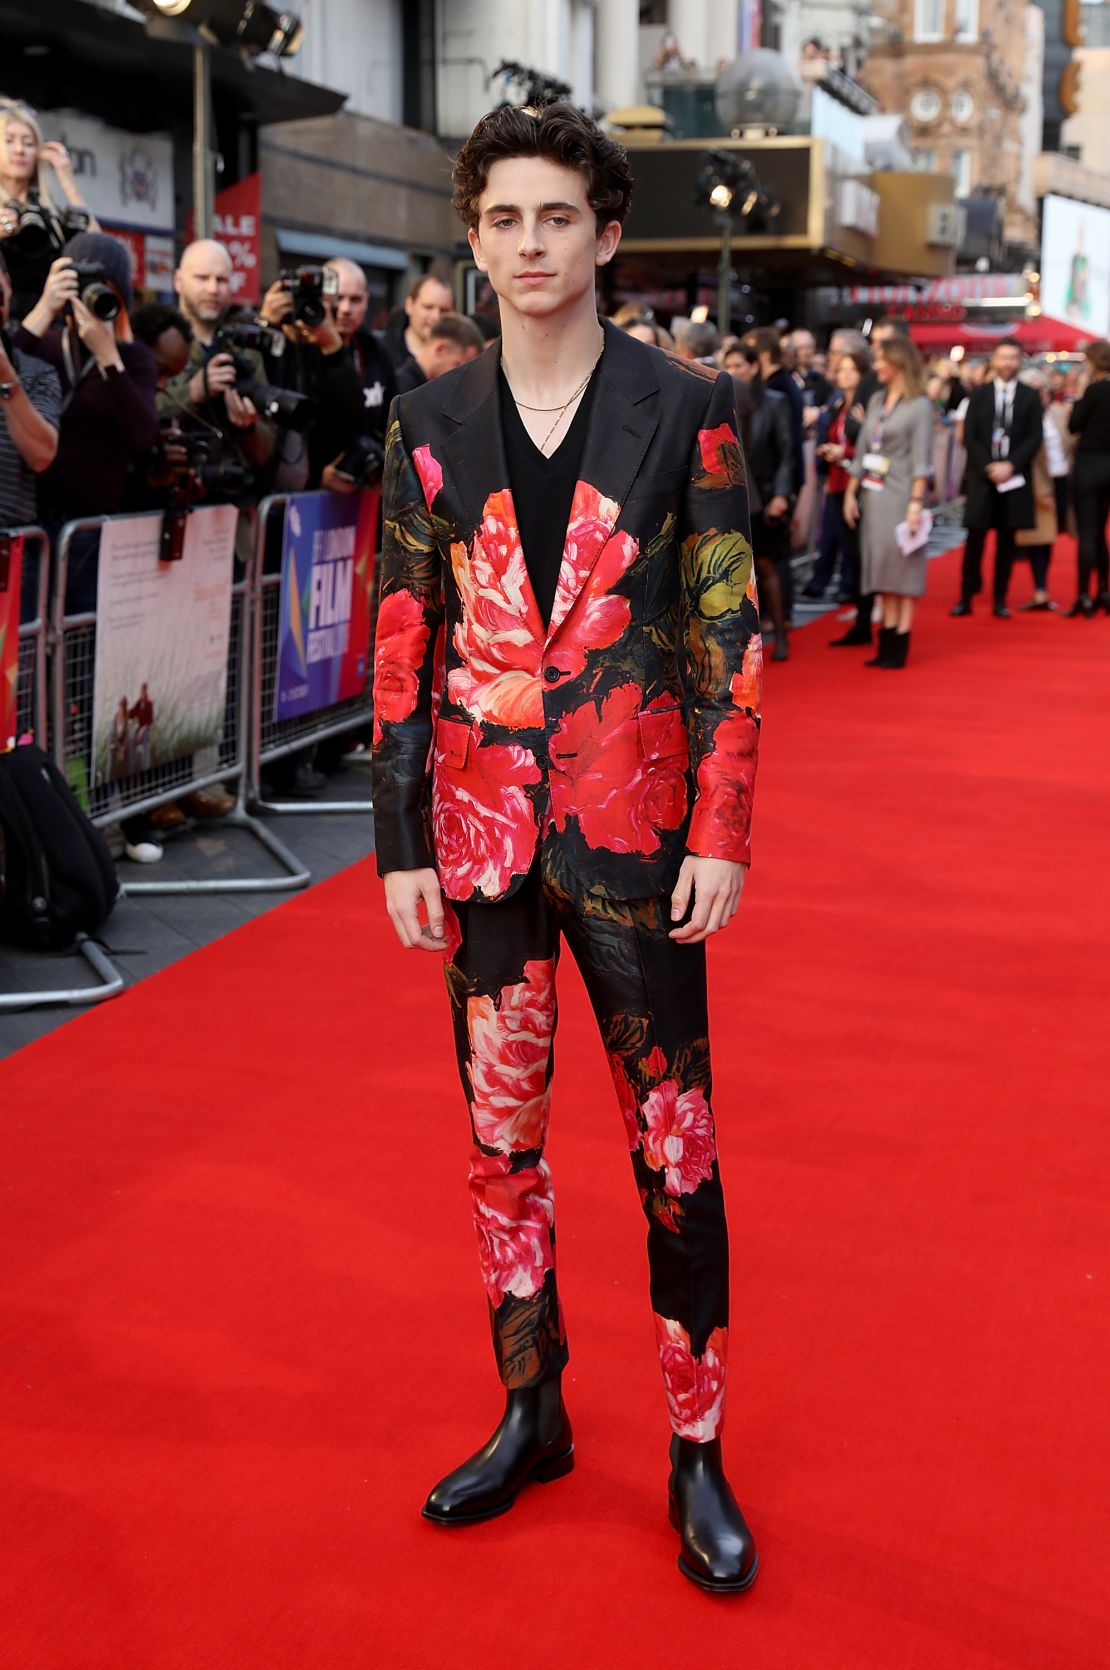 Timothee Chalamet's Most Iconic Red Carpet Looks